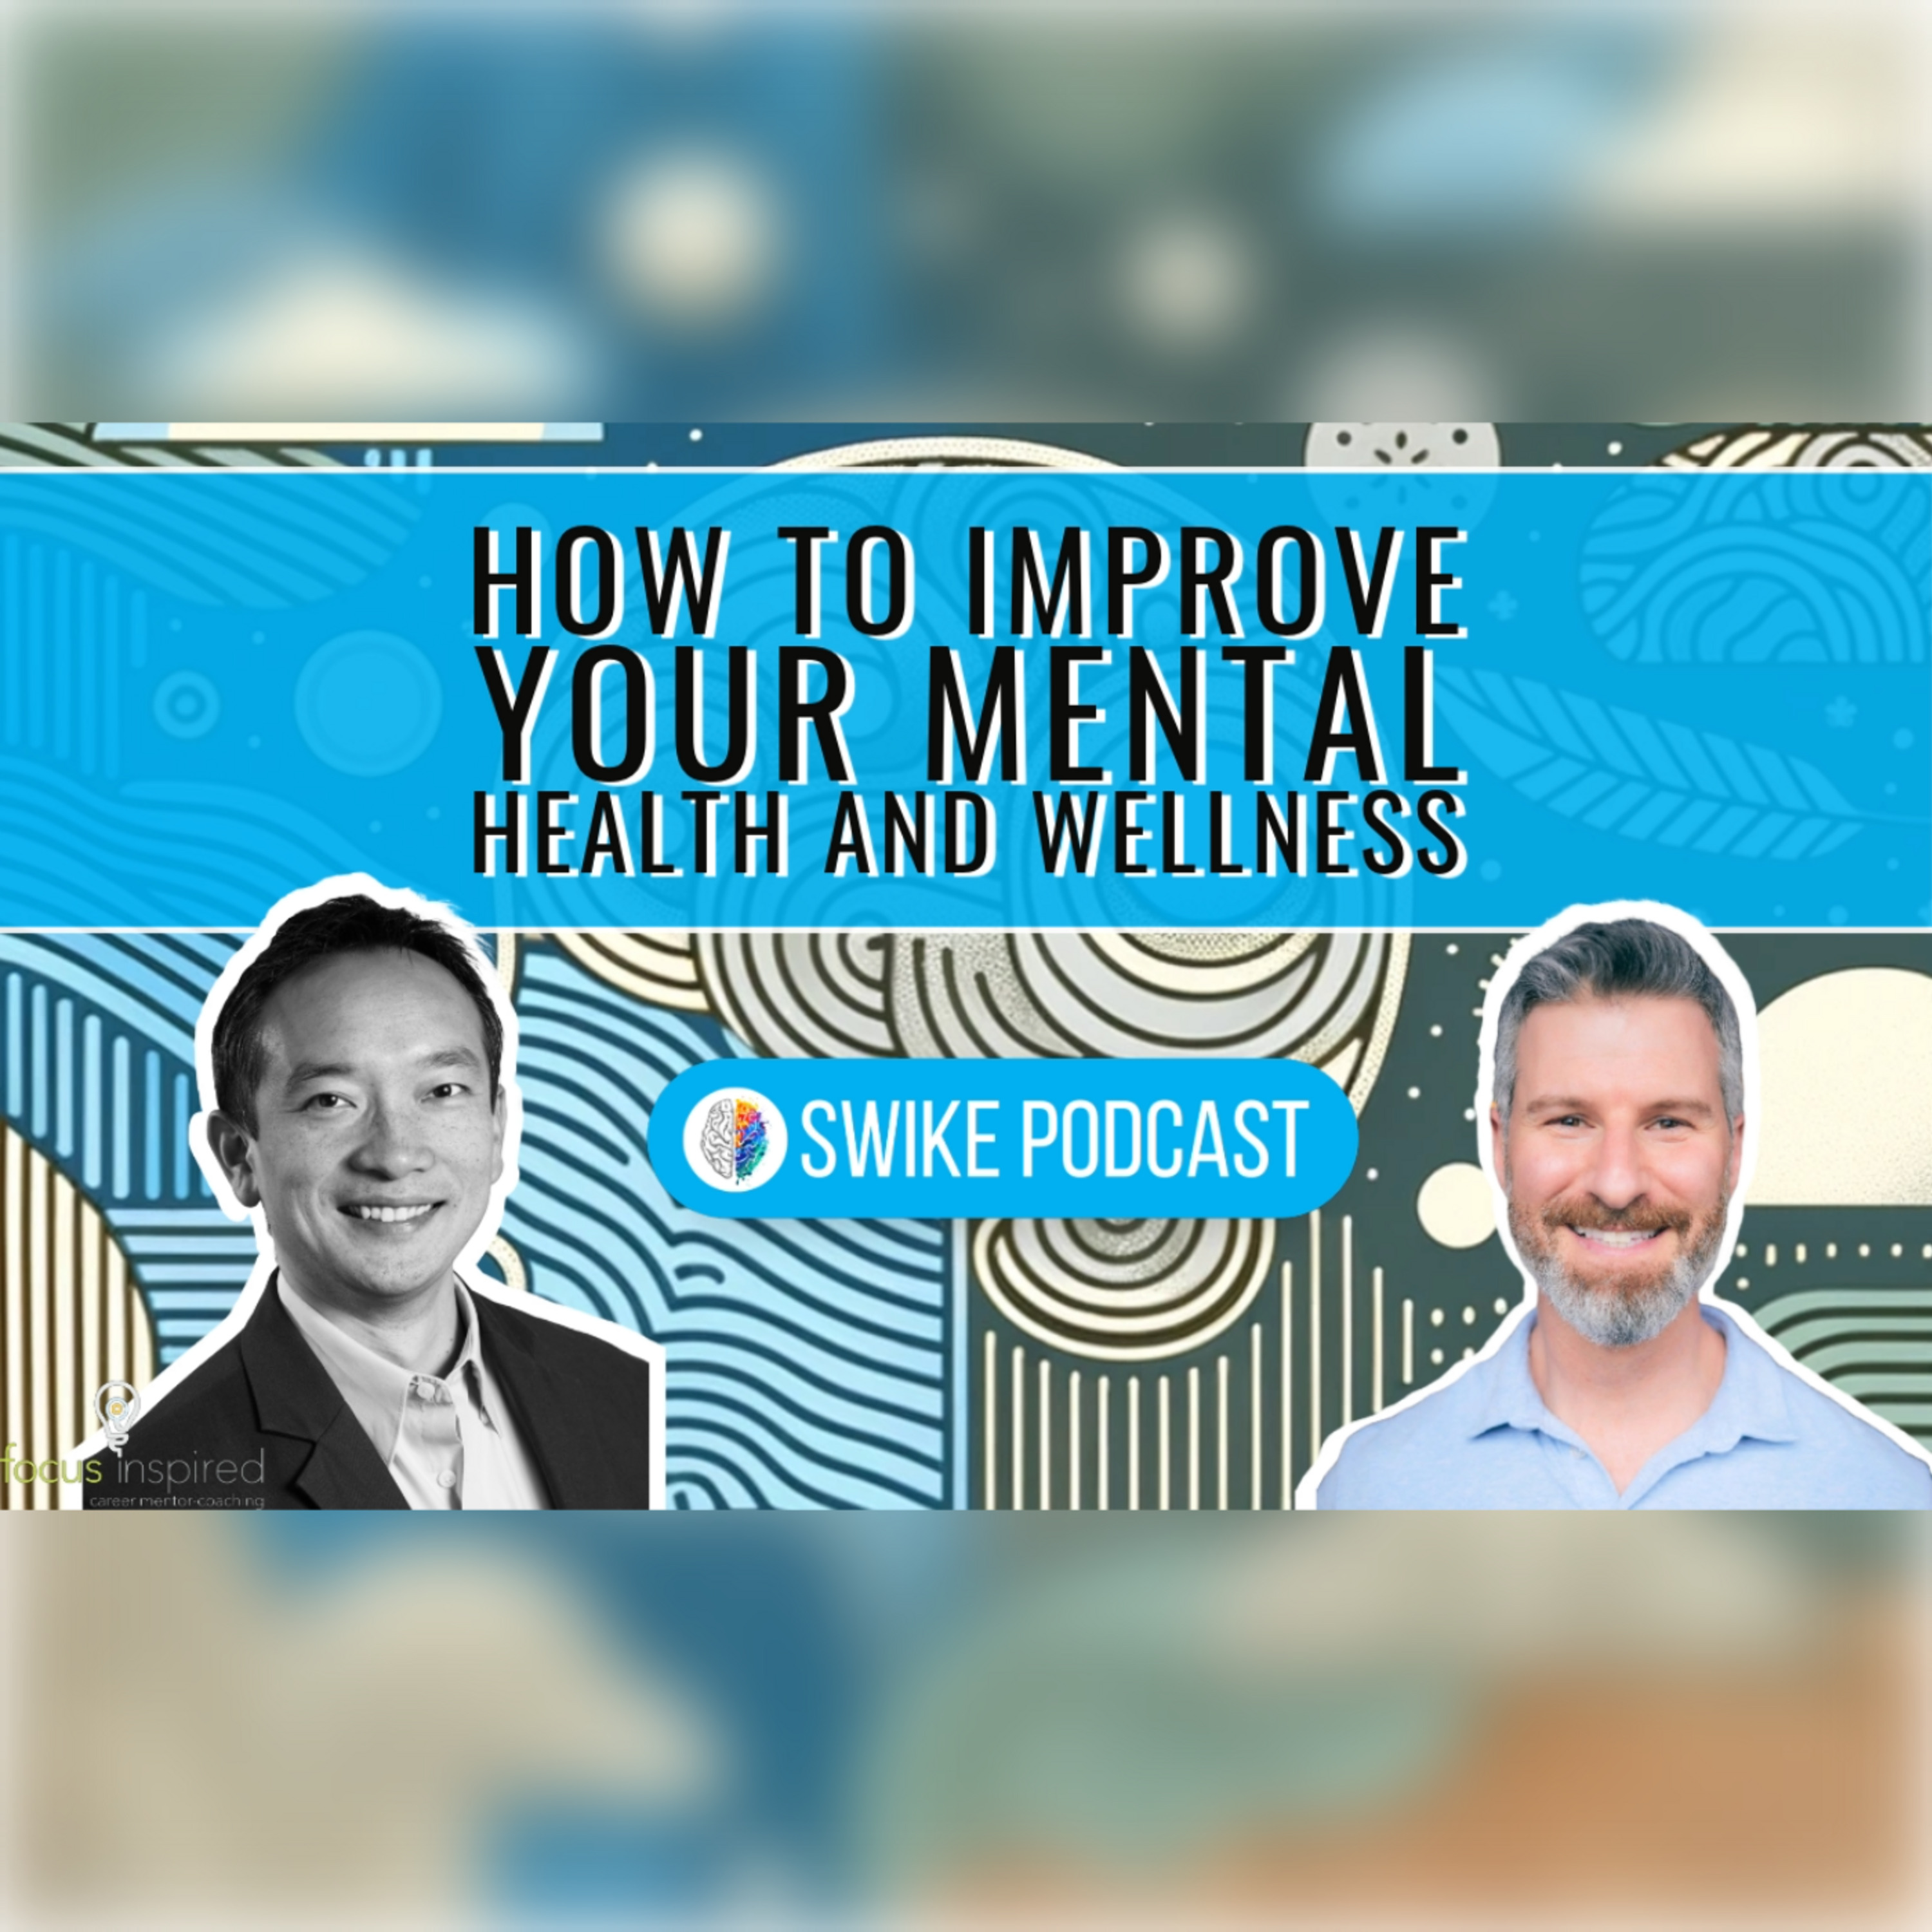 How to improve your mental health and wellness | SIWIKE Podcast | Corey Chadwick (CChad-001)